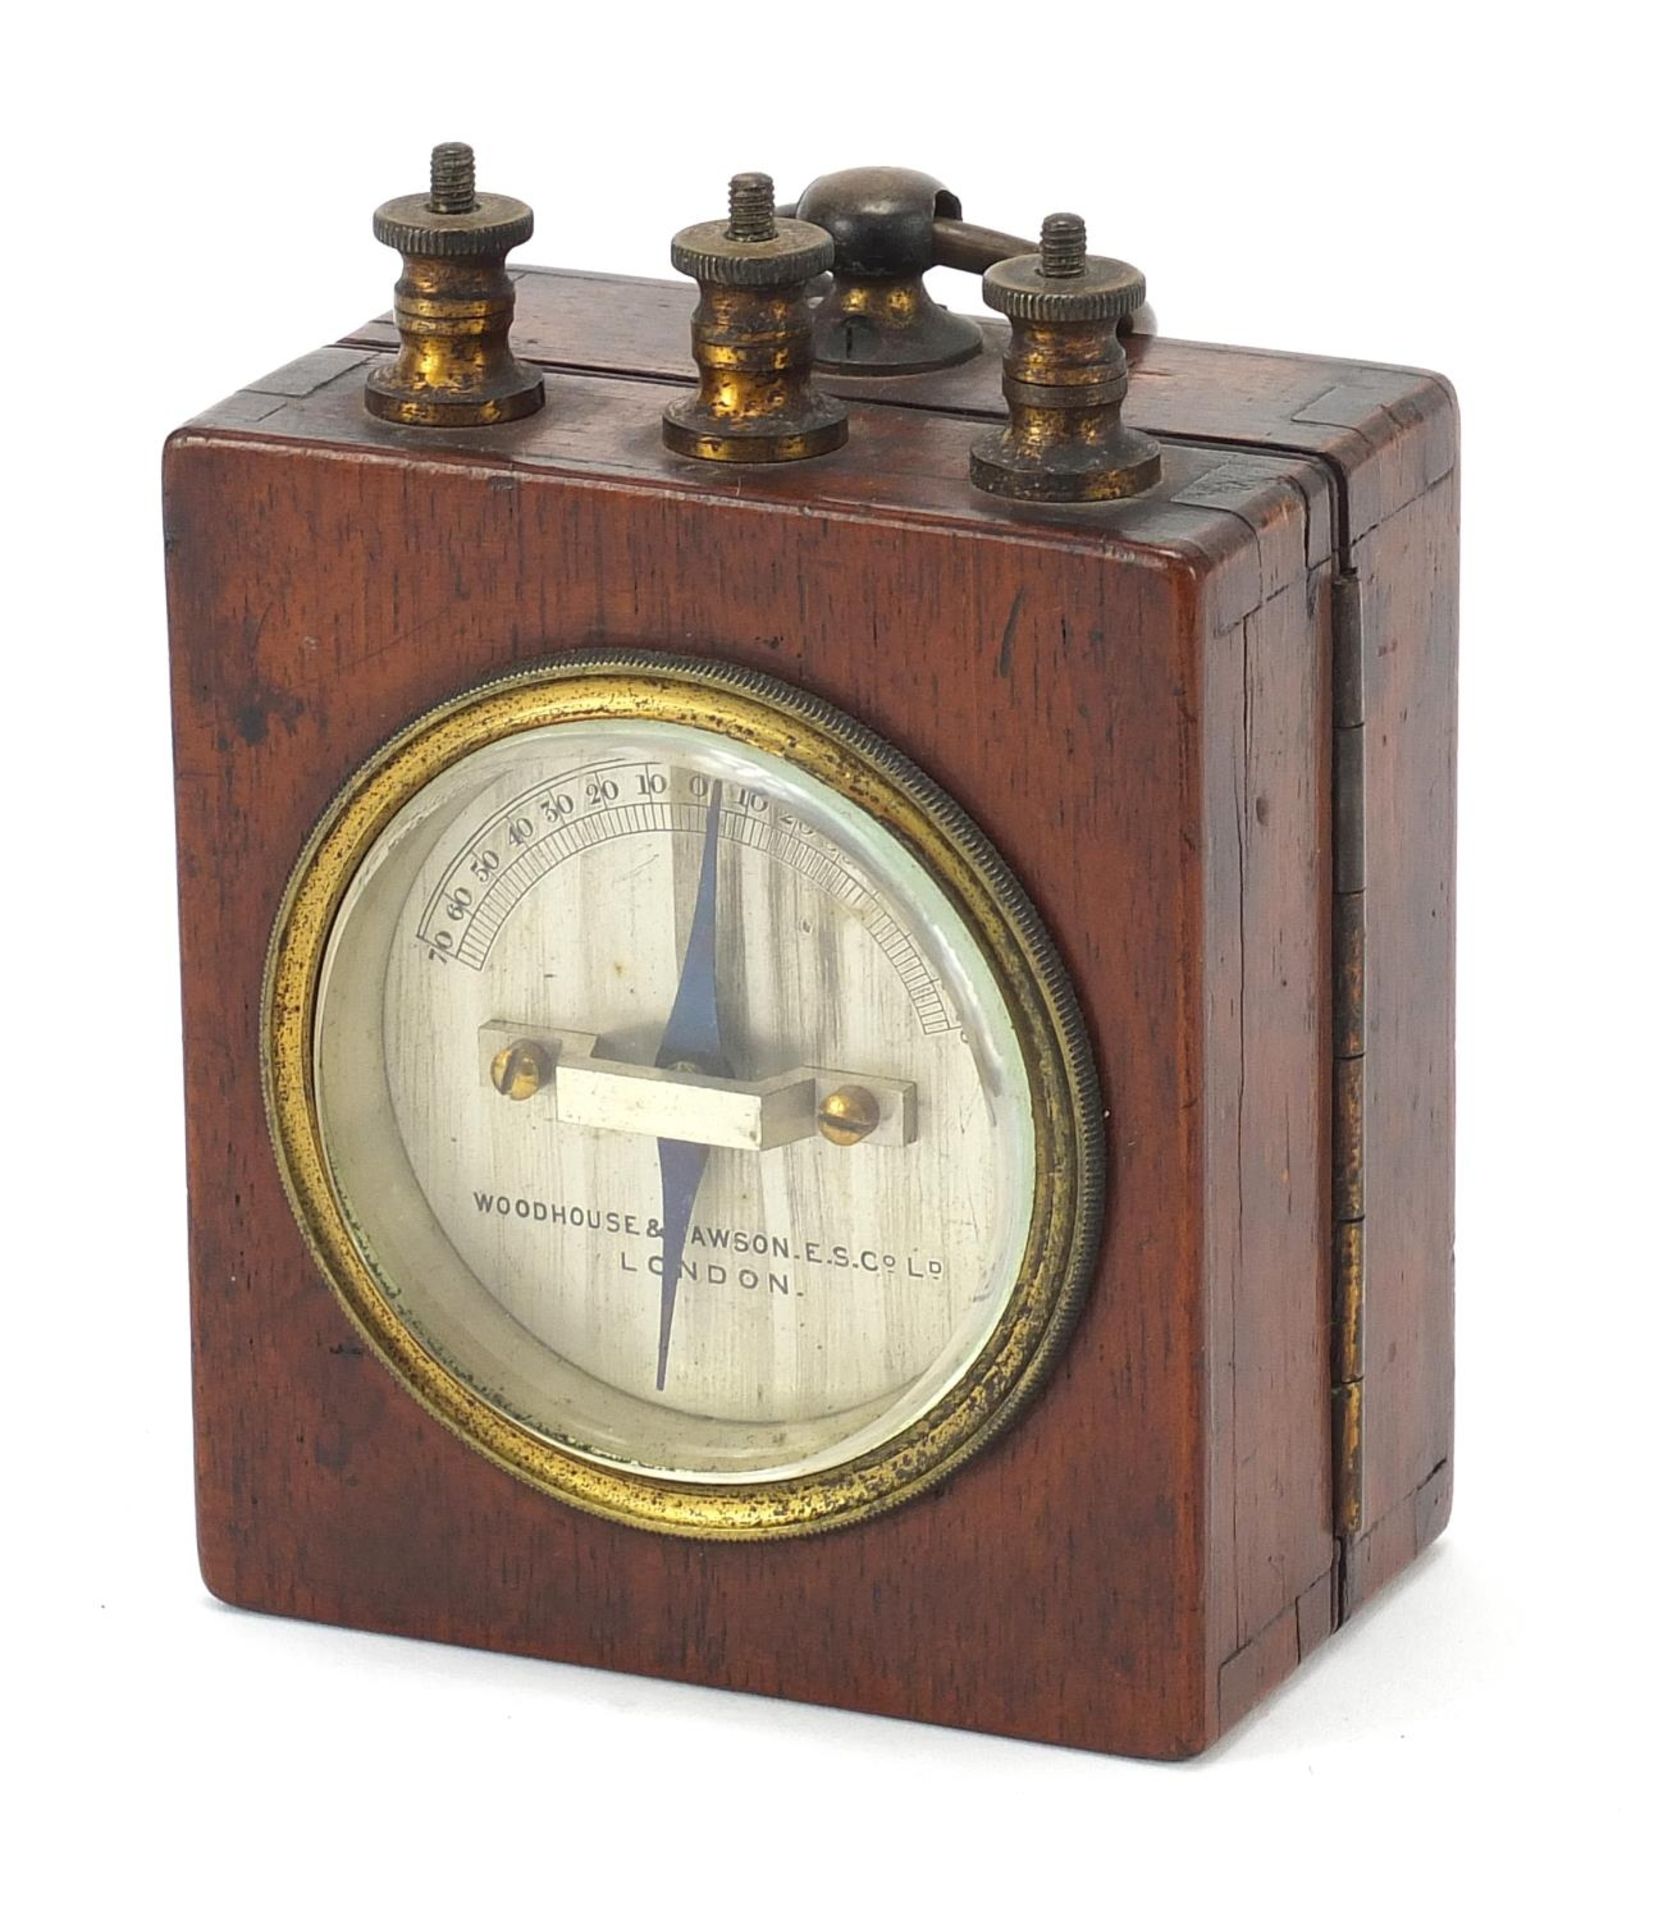 Woodhouse & Lawson electrical voltage meter